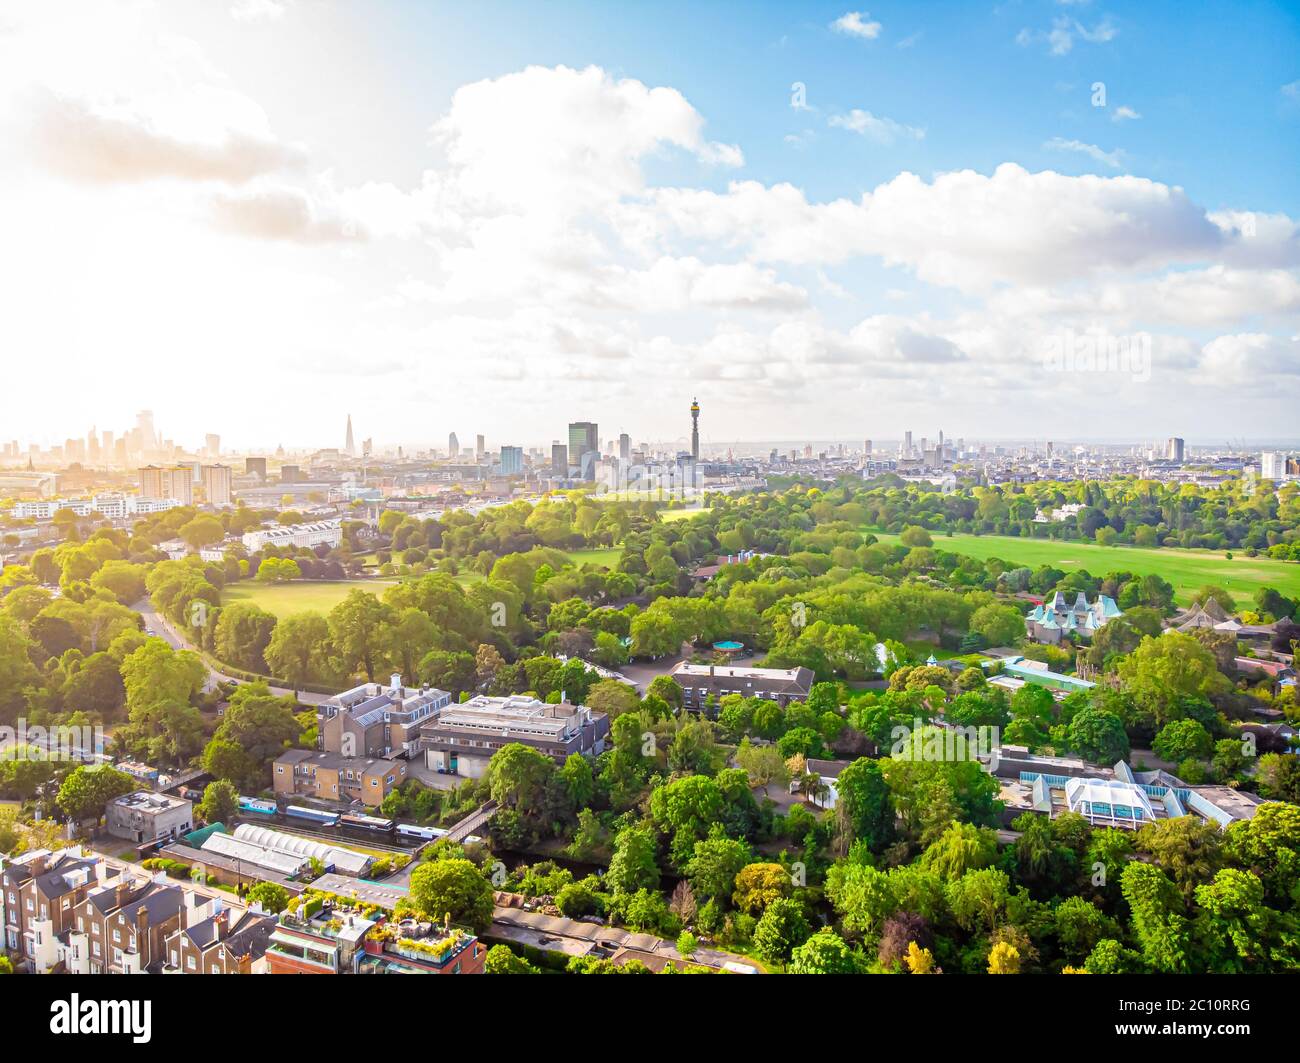 Aerial view of Regents park in London, UK Stock Photo